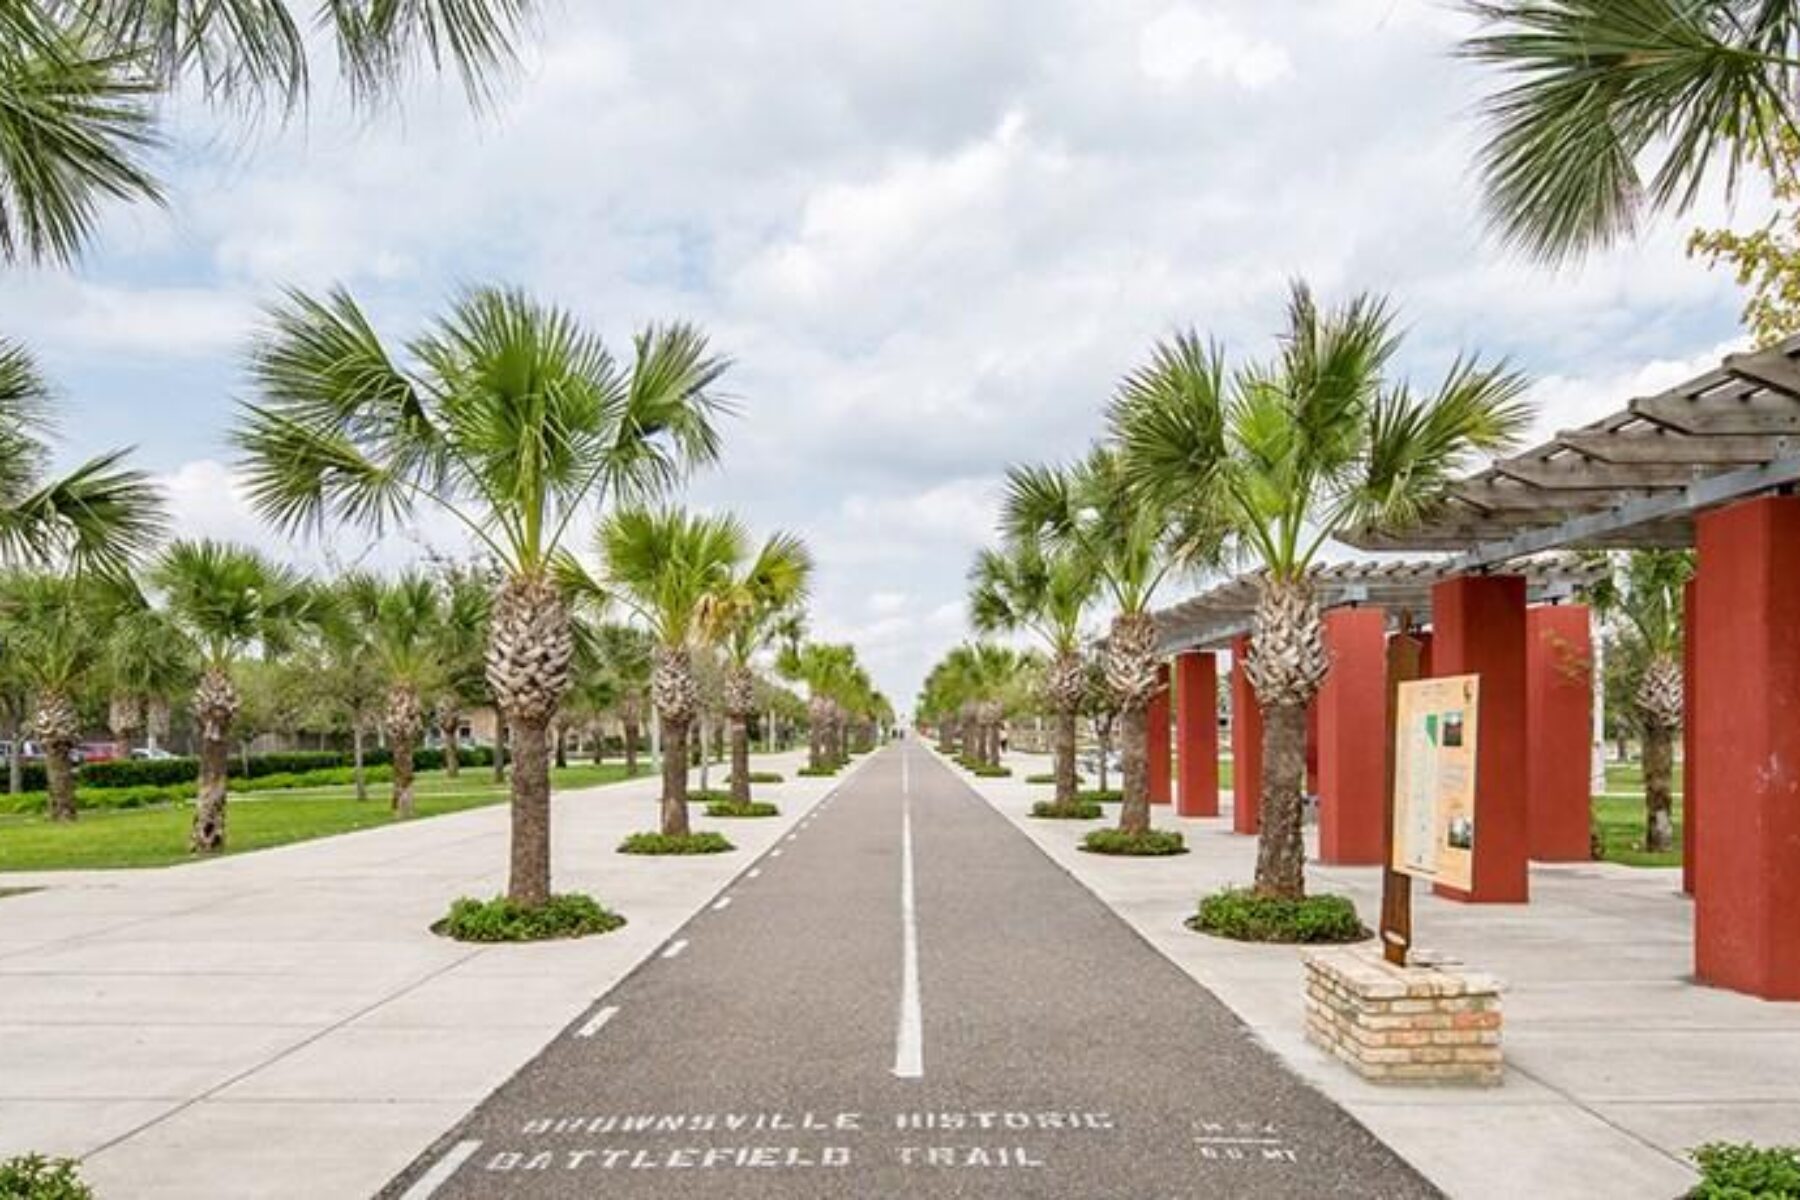 Brownsville, Texas' Historic Battlefield Trail, part of the planned route for the 428-mile Lower Rio Grande Valley Active Plan multiuse trail network | Photo by Mark Lehmann